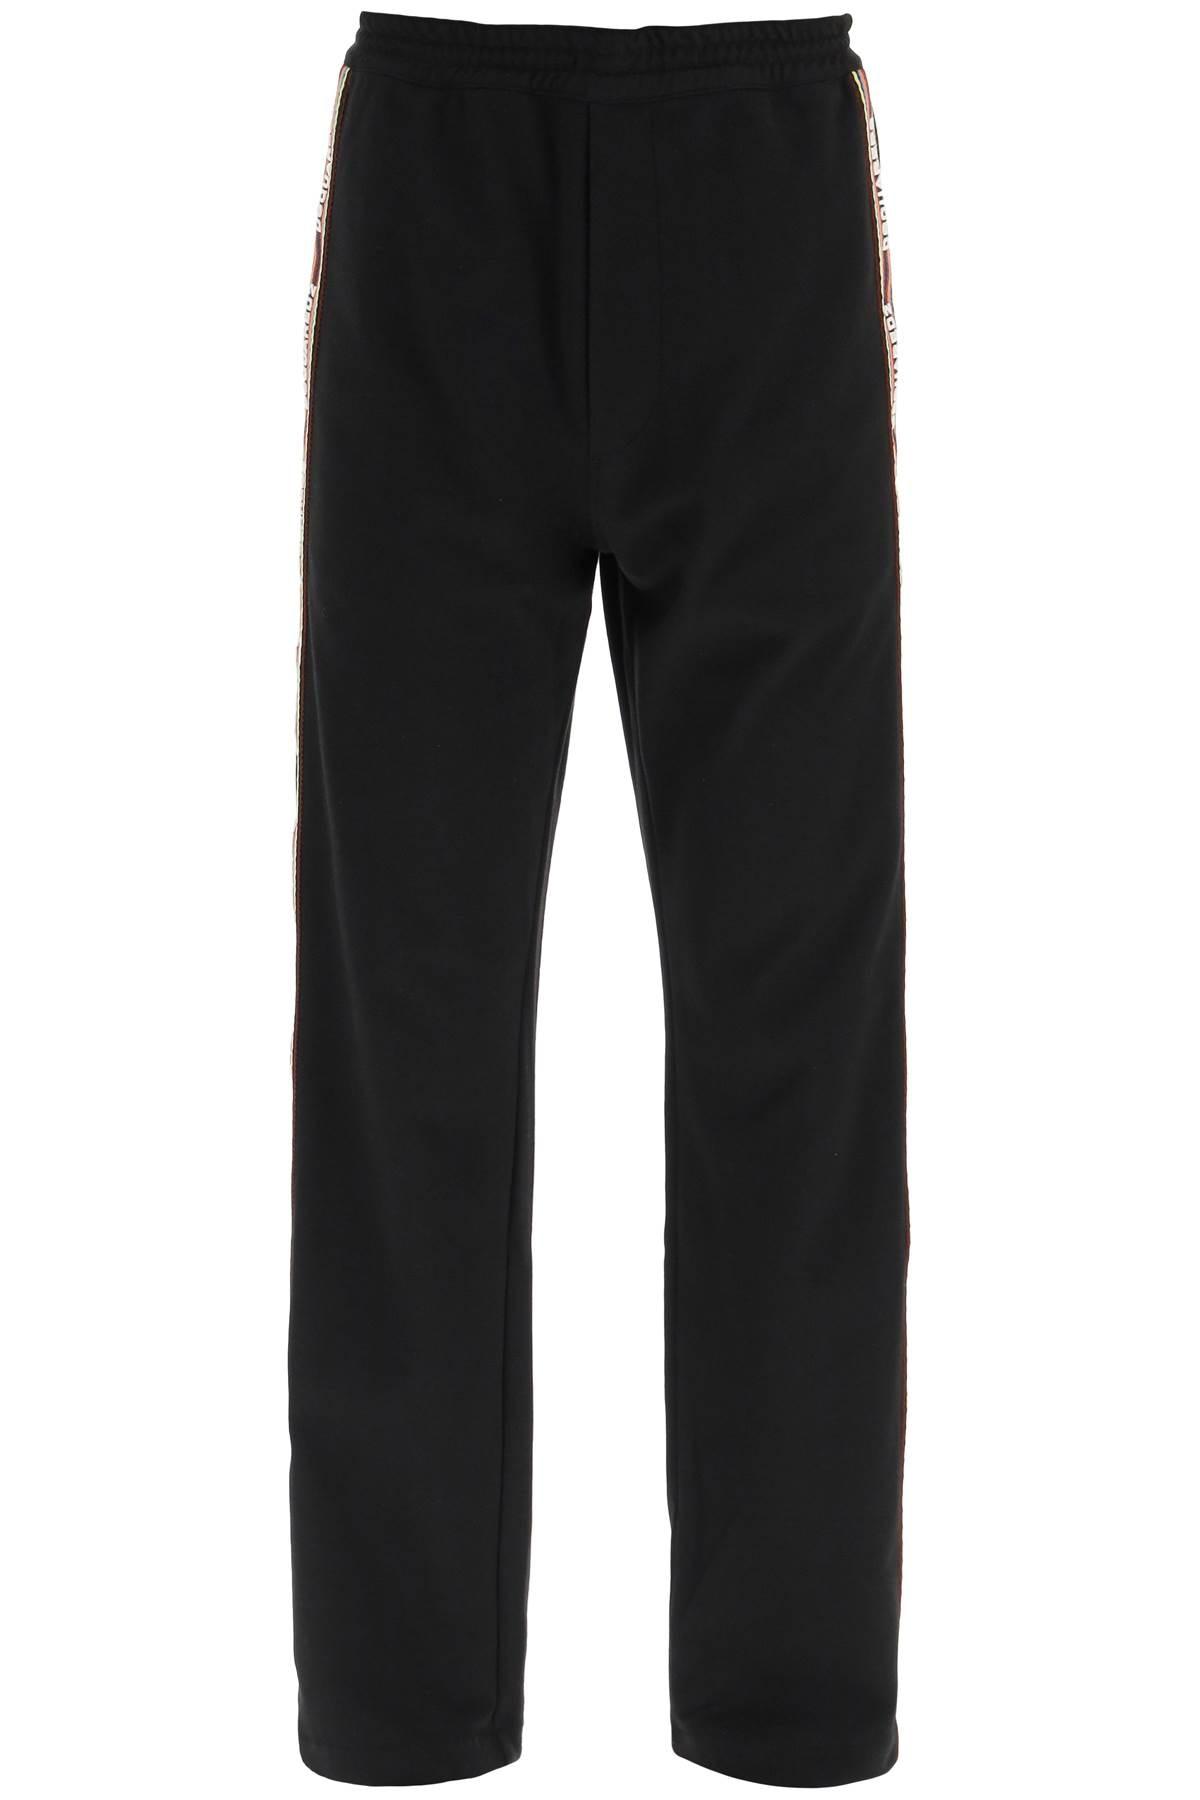 DSquared² Track Pants With Logo Bands in Black for Men | Lyst